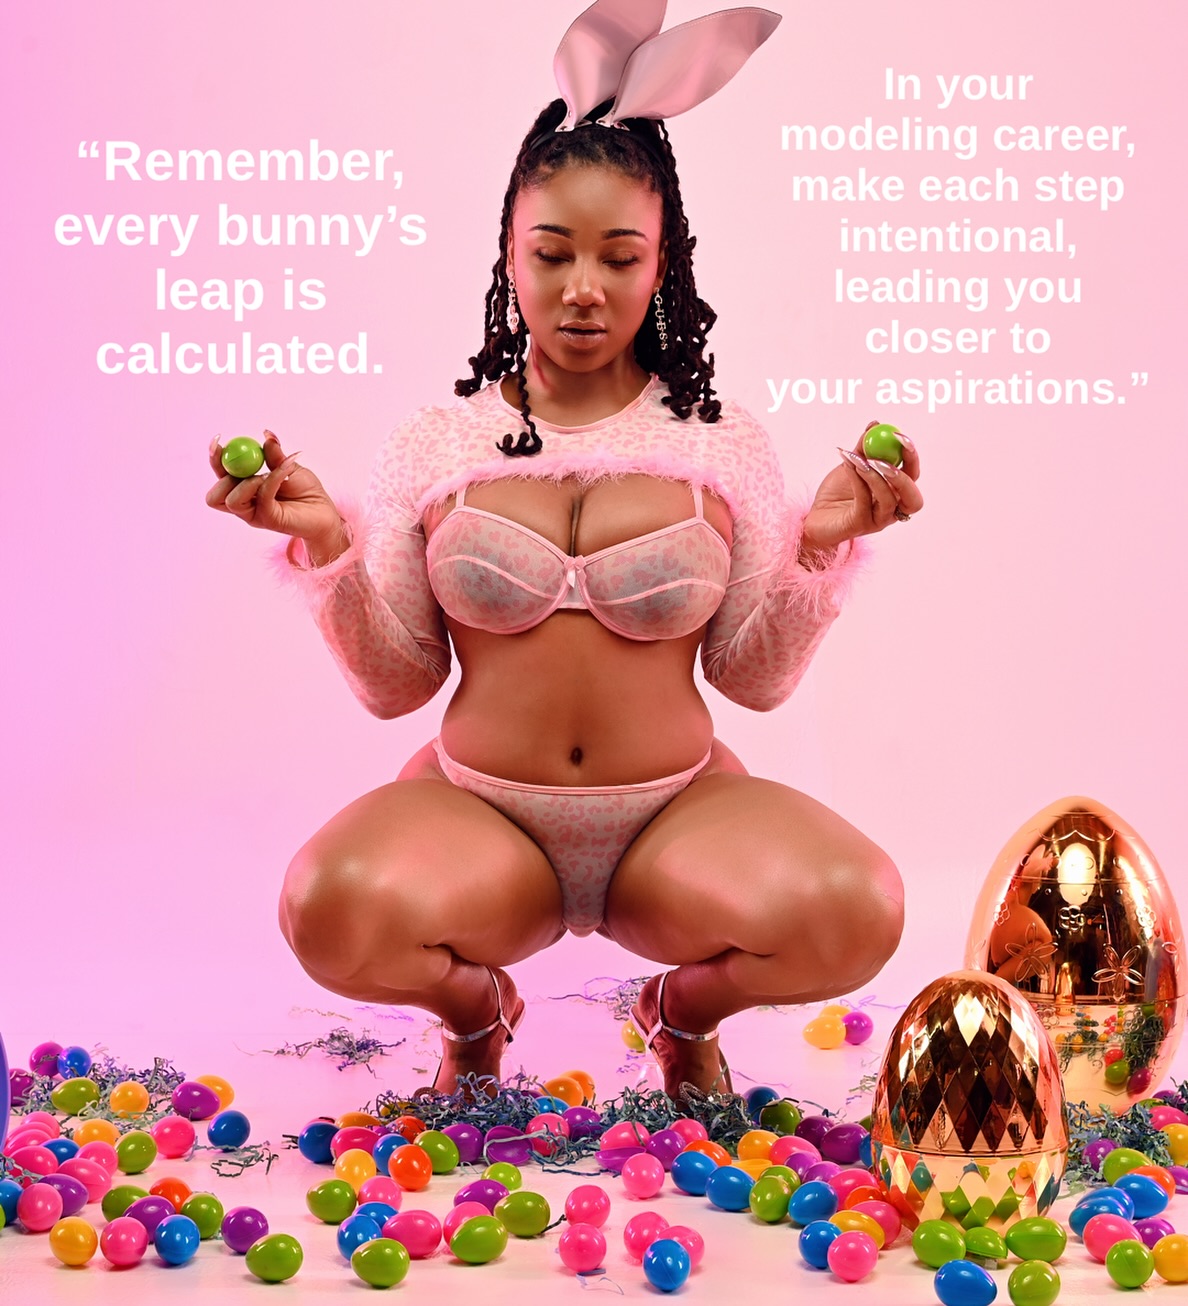 “In the world of modeling, be like the bunny – adaptable, swift, and always moving gracefully towards your goals, no matter the terrain.”

I wanted to drop some words of wisdom to inspiring content creators out there. Hope this helps. 

#easter #inspiration #inspirationalquotes #thicc #thiccmemes #thickthighssavelives #thick #thickwomen #blackmodels #dmvmodels